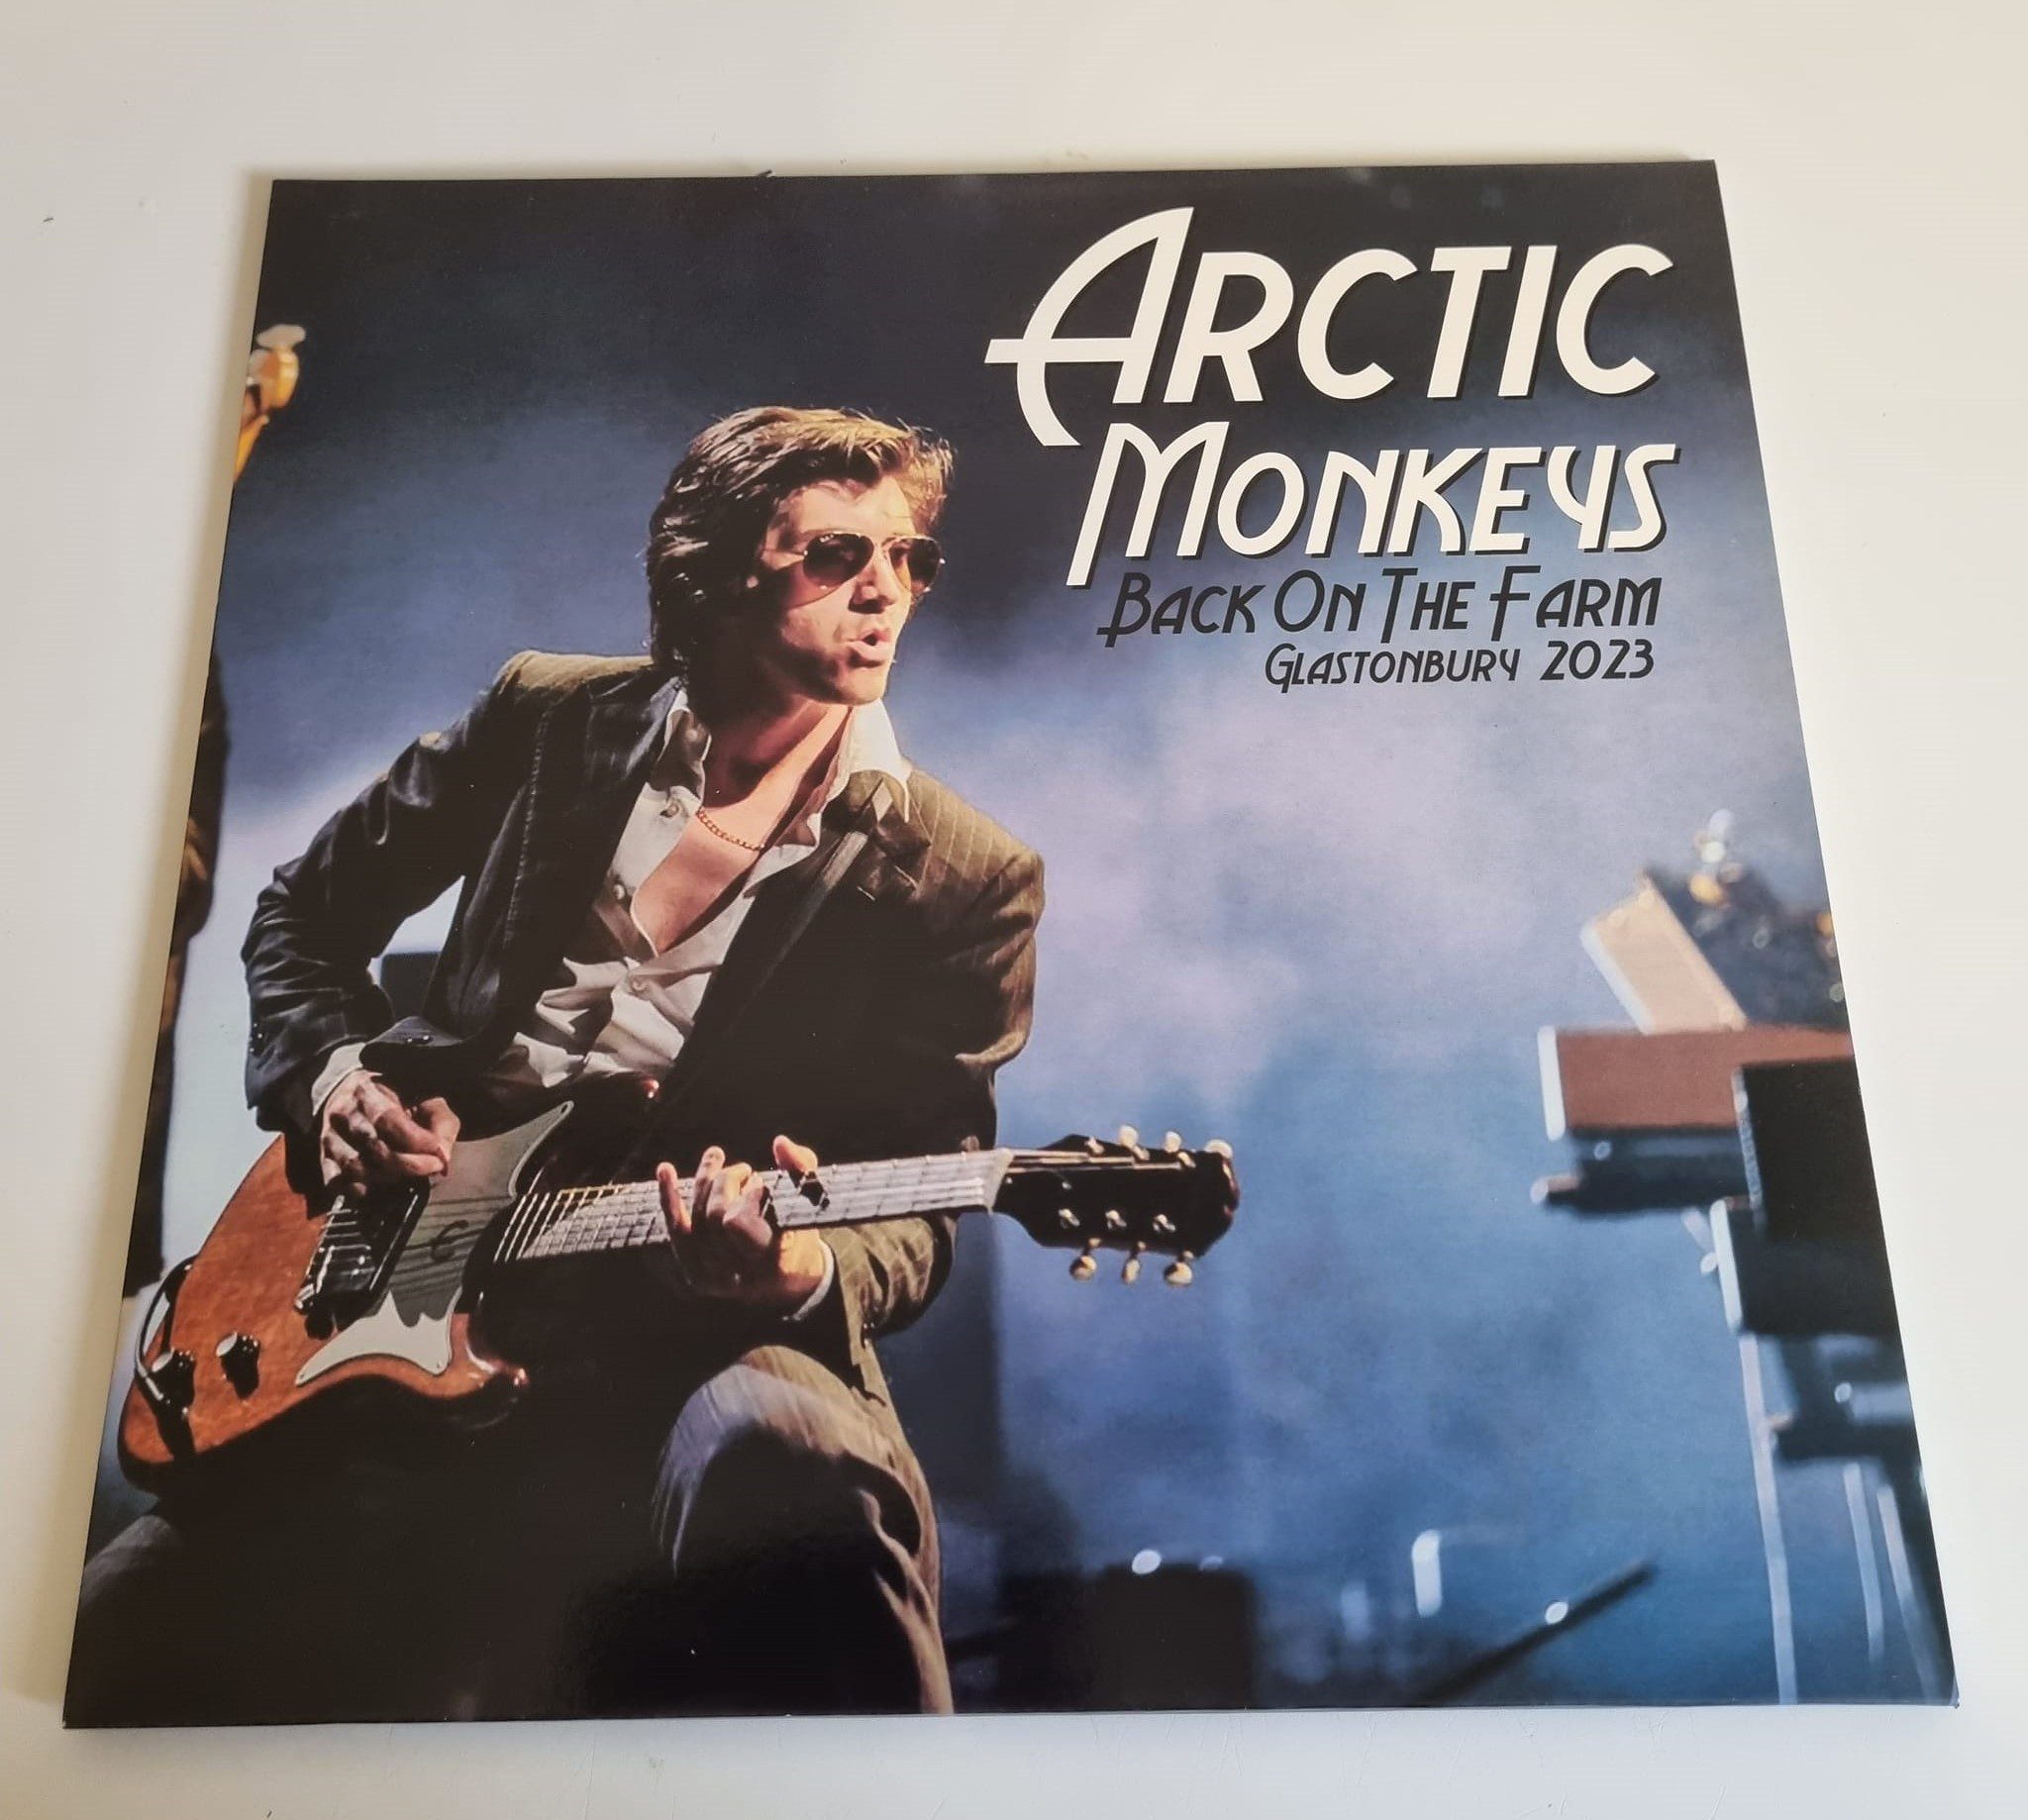 Buy this rare Arctic Monkeys record by clicking here